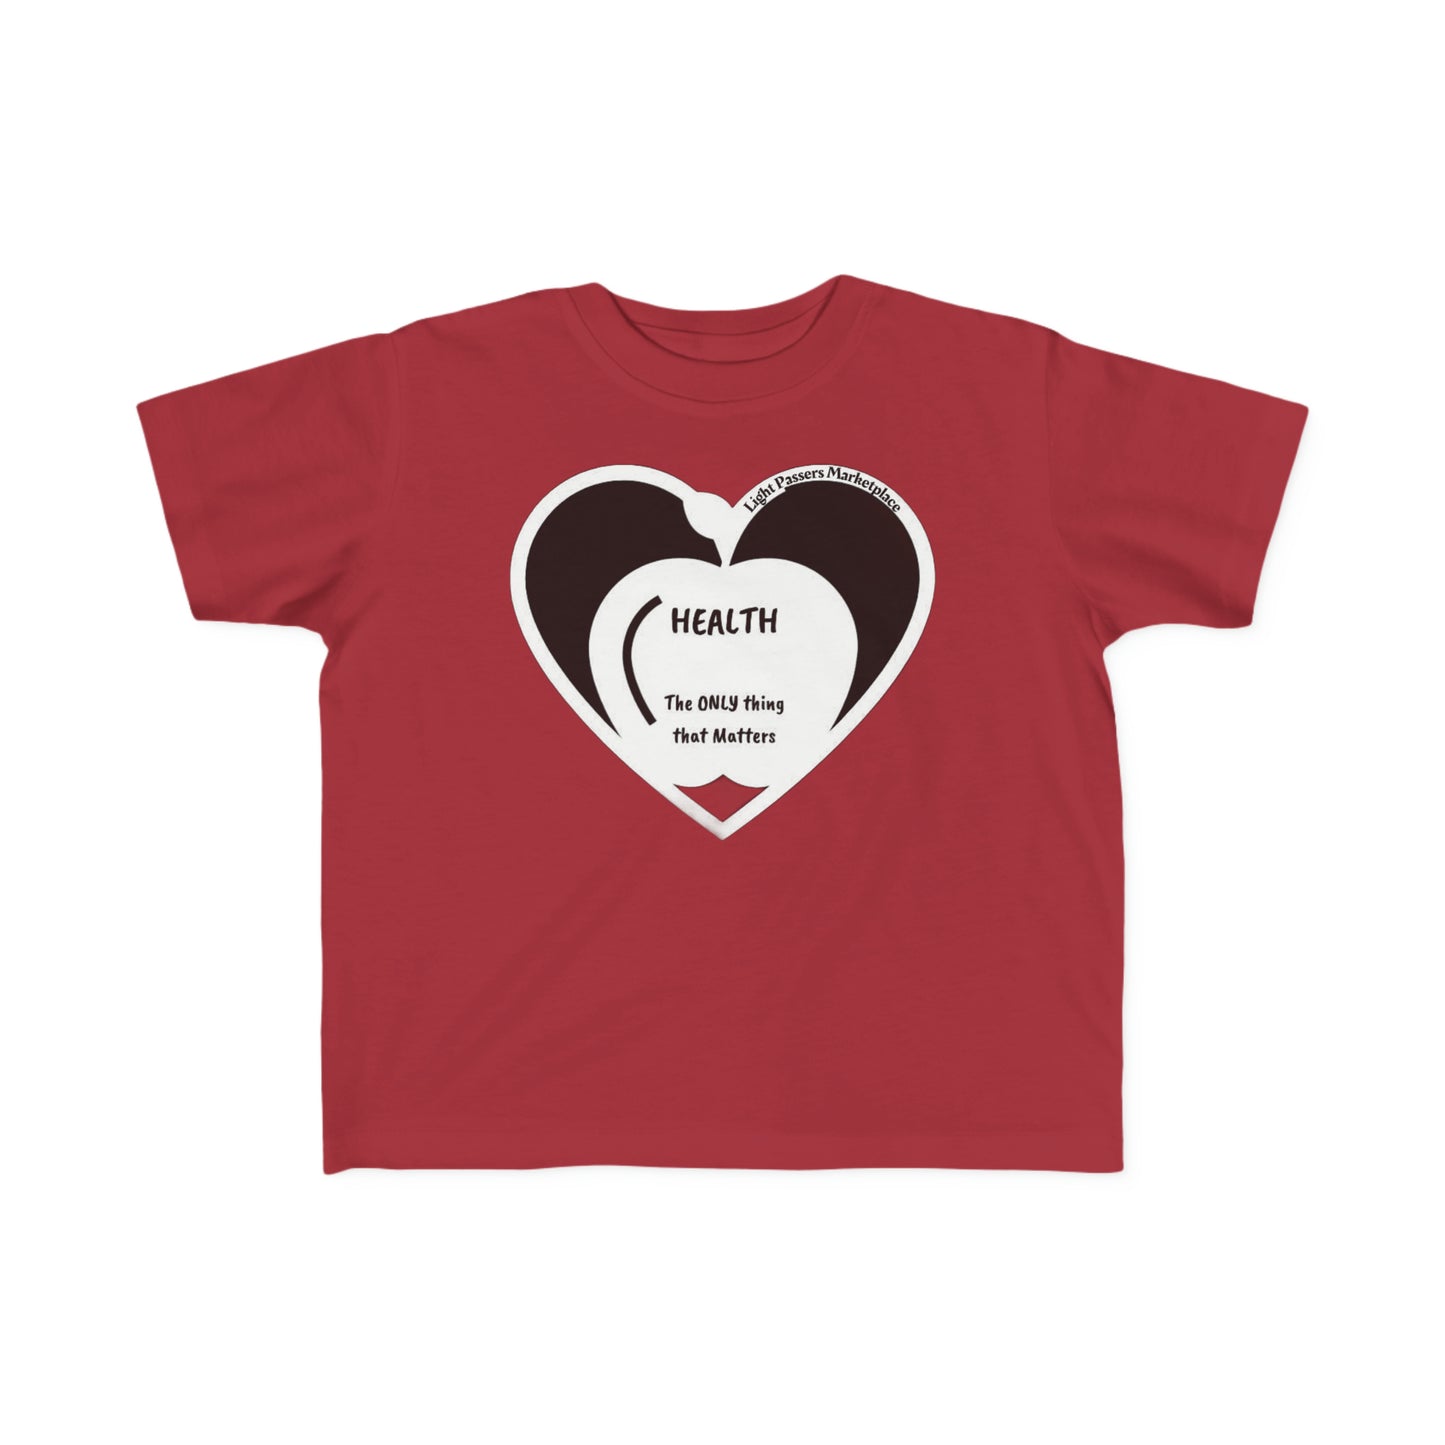 A red toddler t-shirt with a heart design and text, made of soft, durable cotton for sensitive skin. Classic fit, tear-away label, perfect for little adventurers.